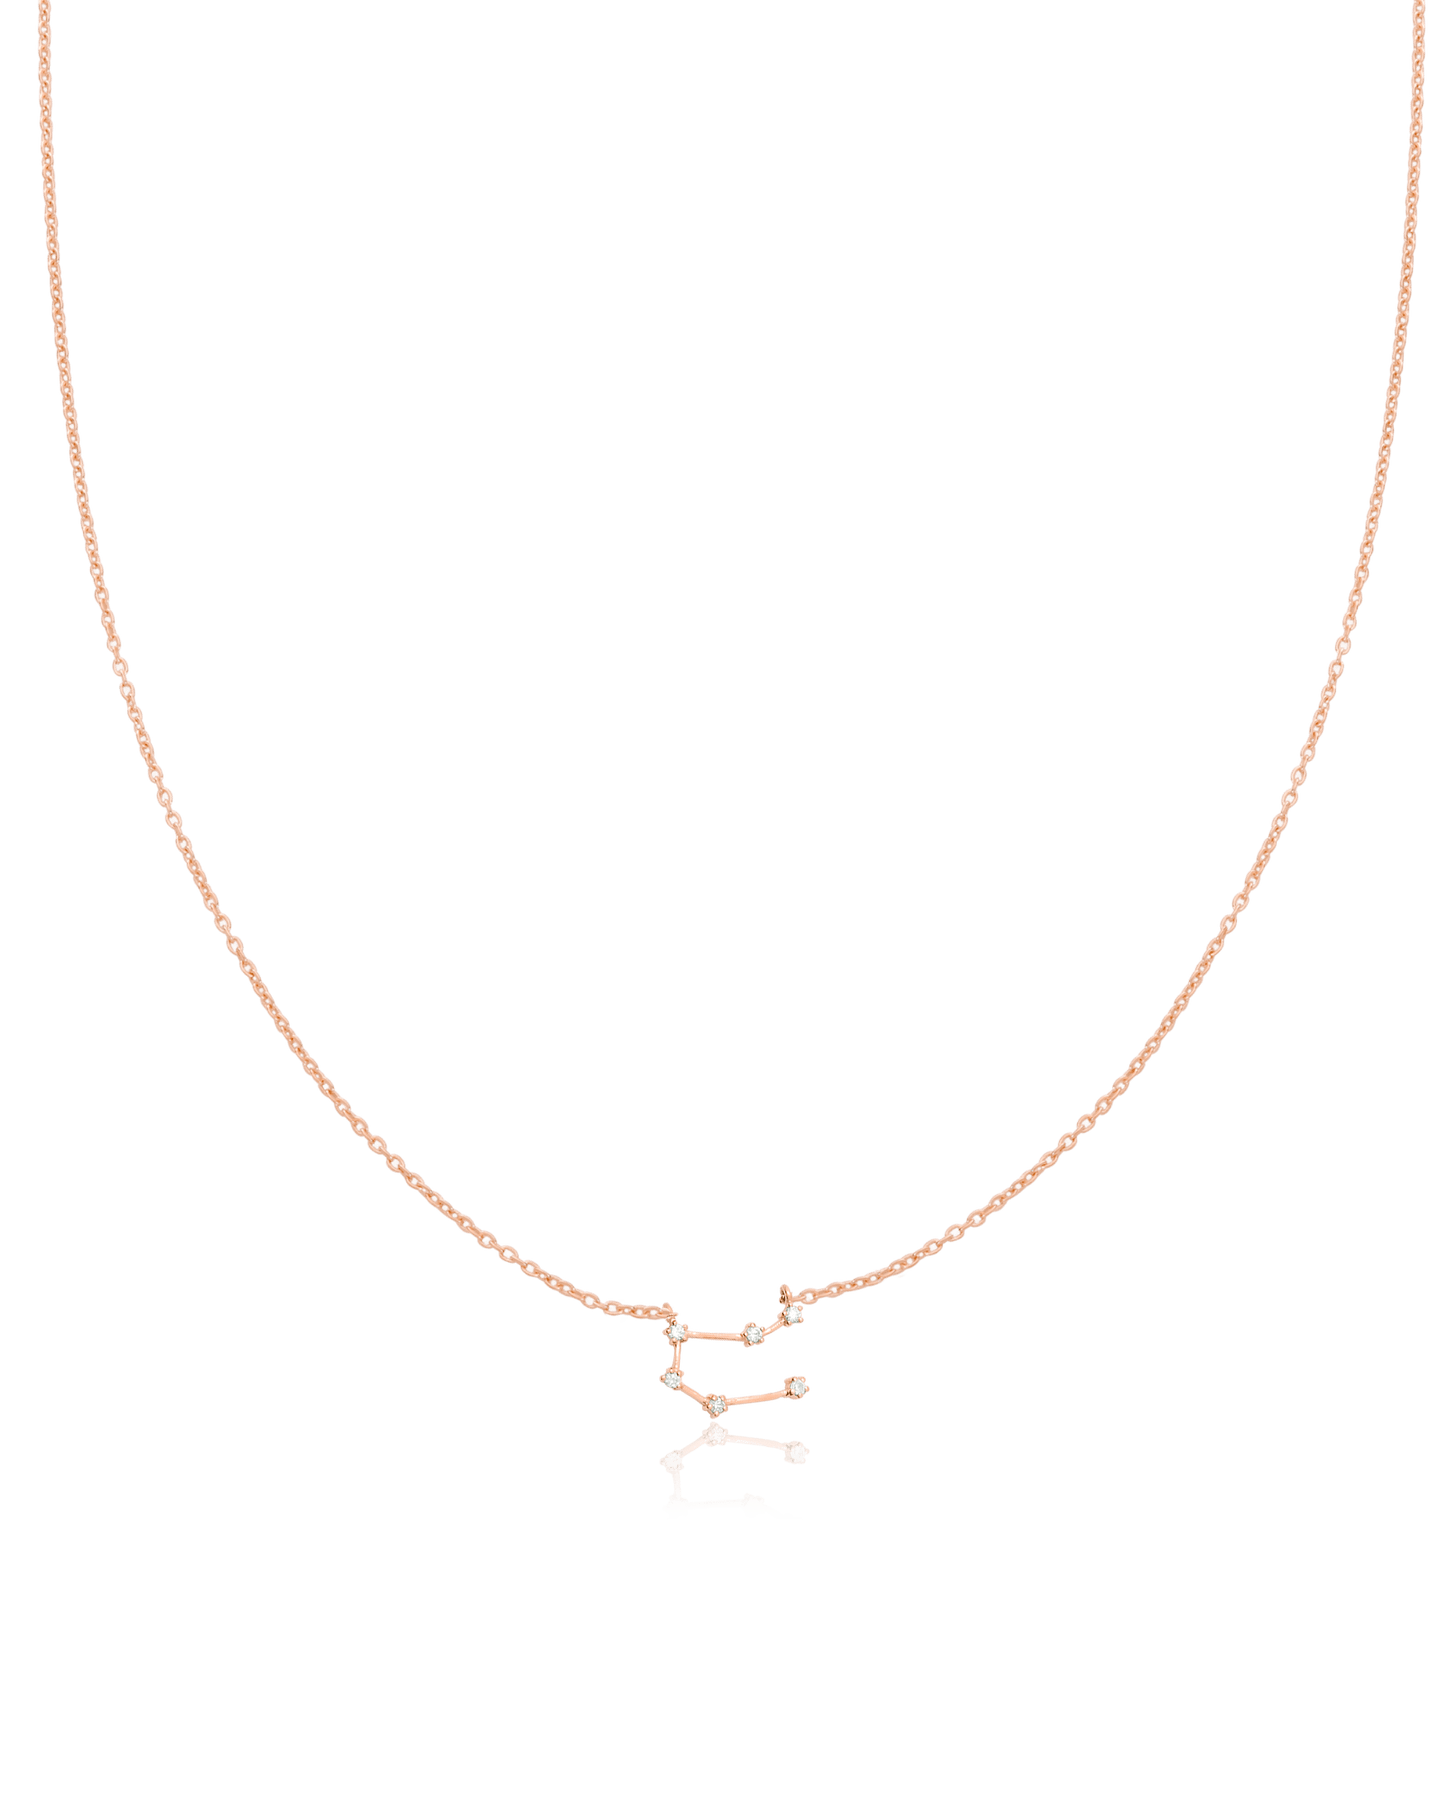 Gemini Constellation Necklace - 925 Sterling Silver Necklaces magal-dev 